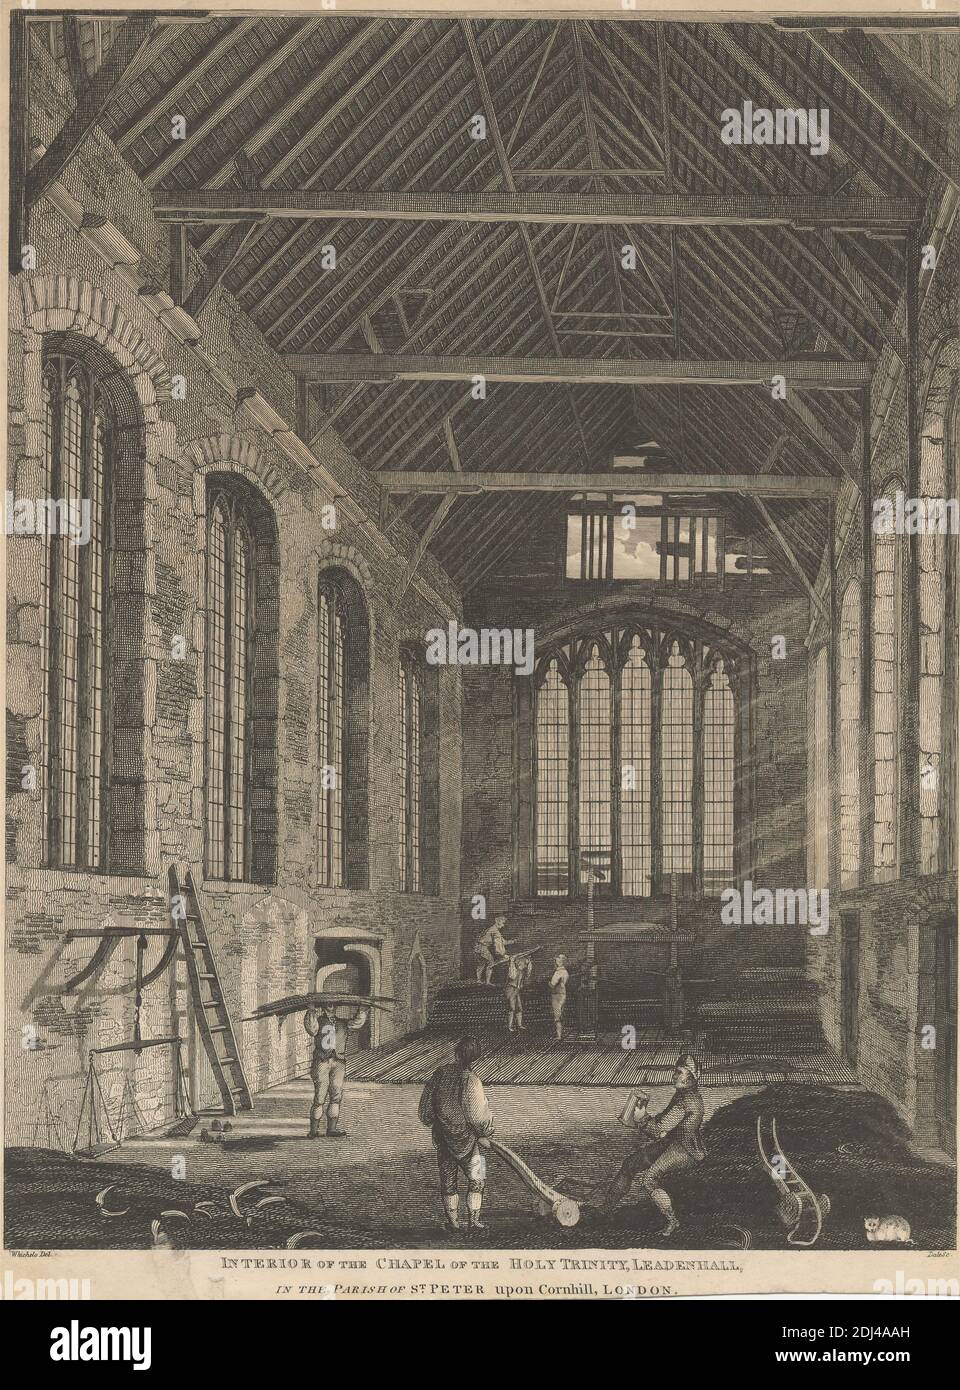 Interior of the Chapel of the Holy Trinity, Print made by Thomas Dale, active ca. 1921, British, after Henry Mayle Whichelo, 1800–1884, British, 1825, Etching on moderately thick, slightly textured, beige wove paper, Sheet: 12 5/8 x 9 5/8 inches (32 x 24.4 cm) and Image: 11 3/4 x 9 1/16 inches (29.8 x 23 cm), architectural subject, beams, boards, carrying, cat (domestic cat), church, construction, genre subject, interior, labor, ladders, men, planks, scales, sitting, stained glass, sunlight, tankard, windows, working, City of London, England, Europe, Greater London, St Peter upon Cornhill Stock Photo